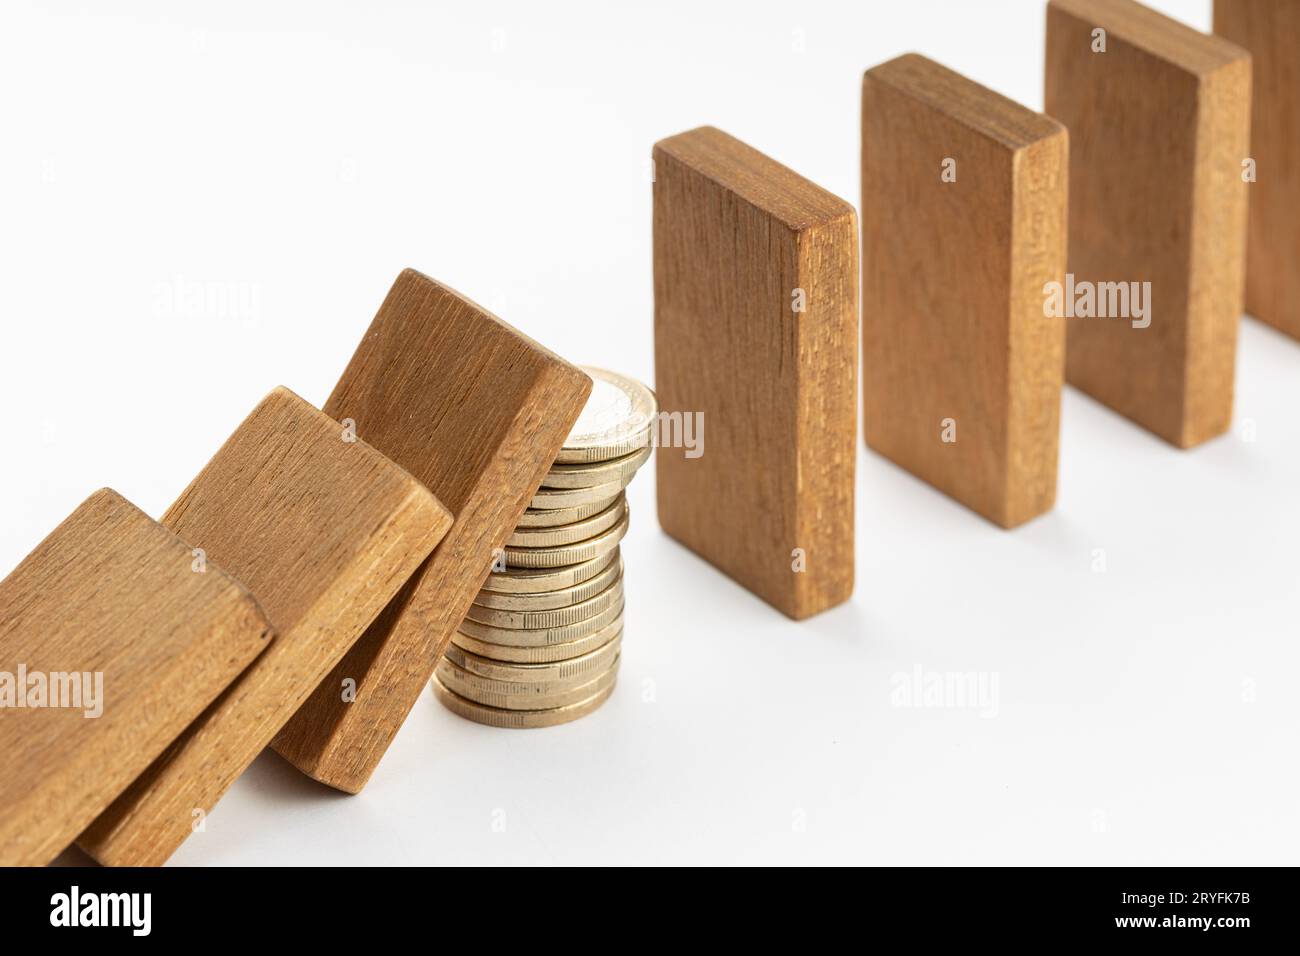 Pile of coins Stopping Falling wooden Dominoes effect. Money support or stimulus stop the financial crisis domino effect Stock Photo